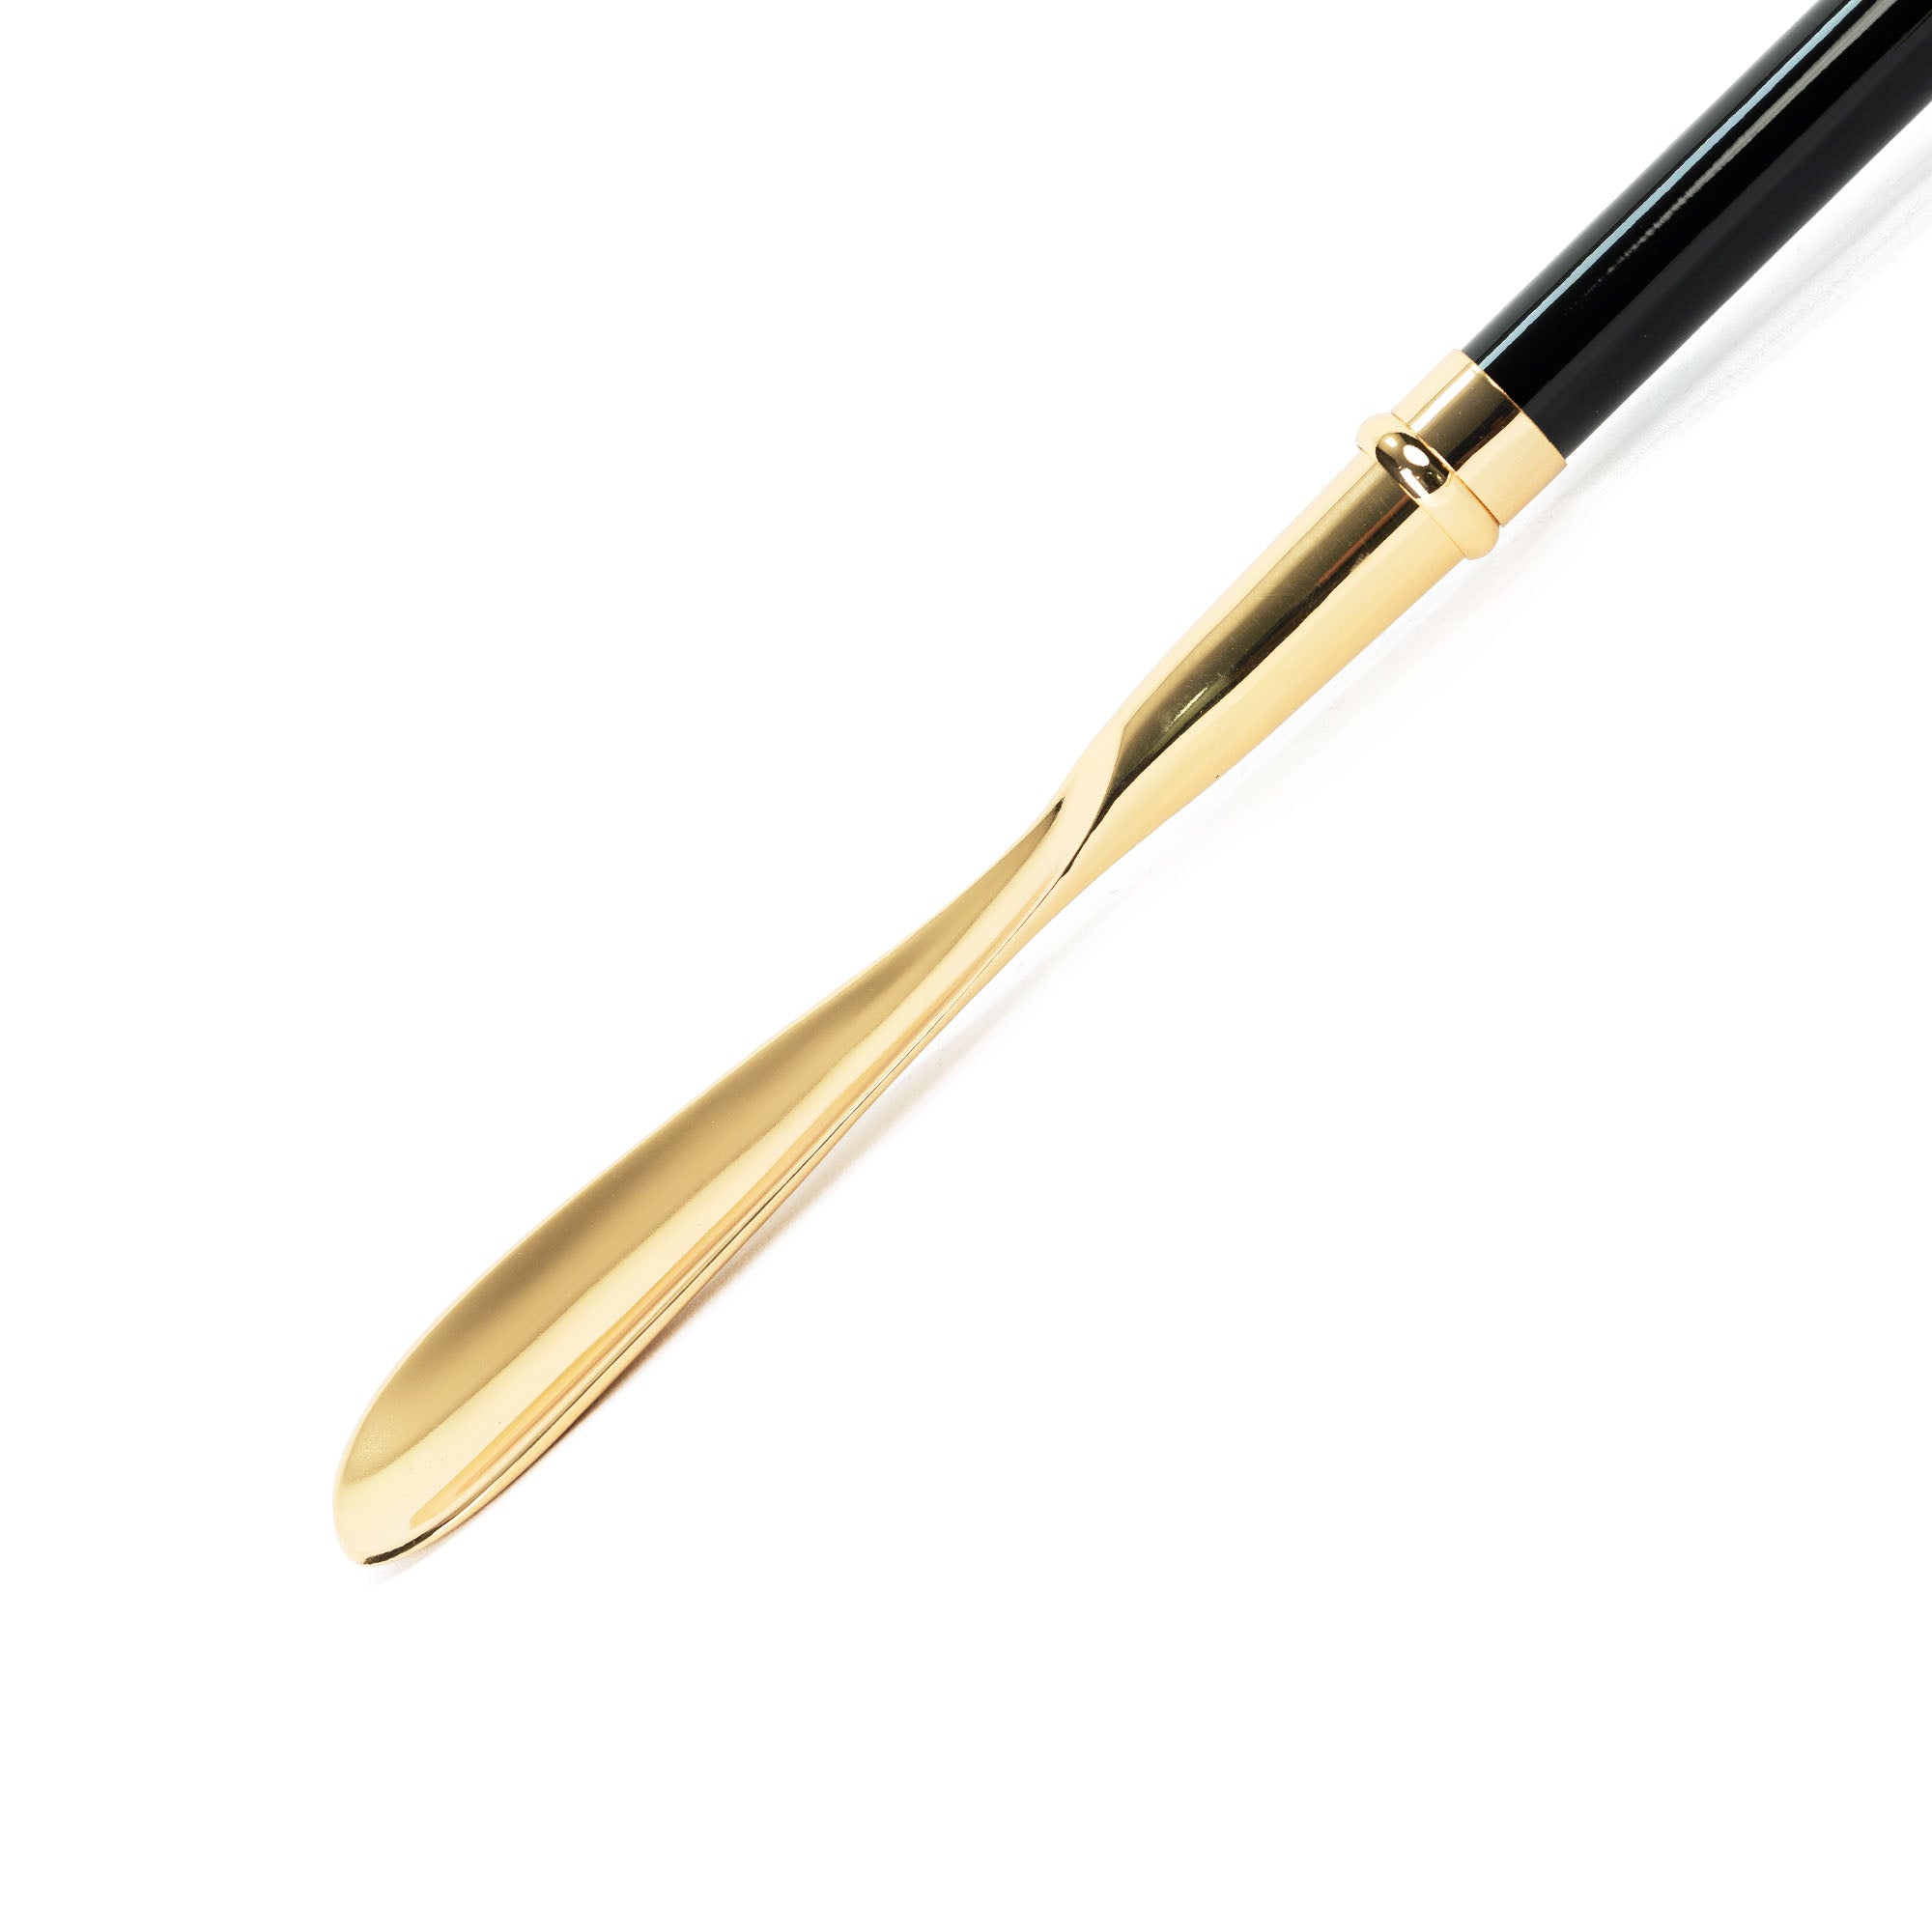 Zebra Zing: 24K Gold-Plated Shoehorn with Hand-Painted Zebra Handle